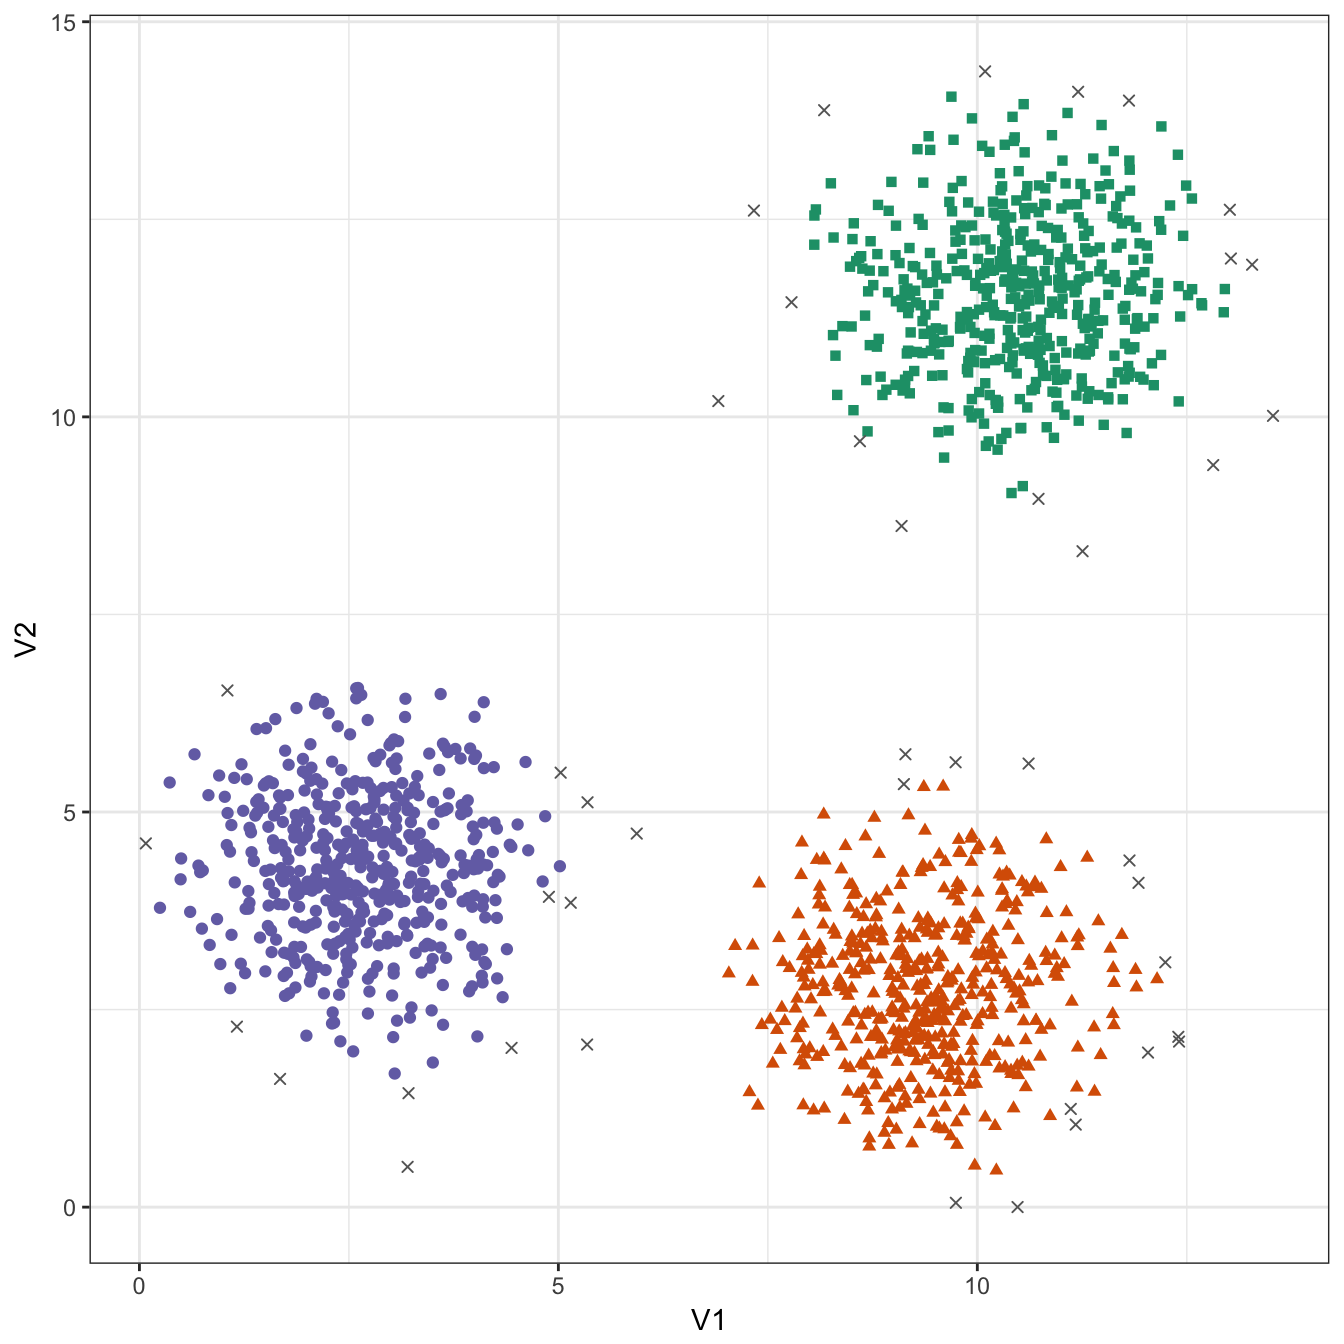 DBSCAN clustering (eps=0.6, minPts=10) of the blobs data set. Outlier observations are shown as grey crosses.